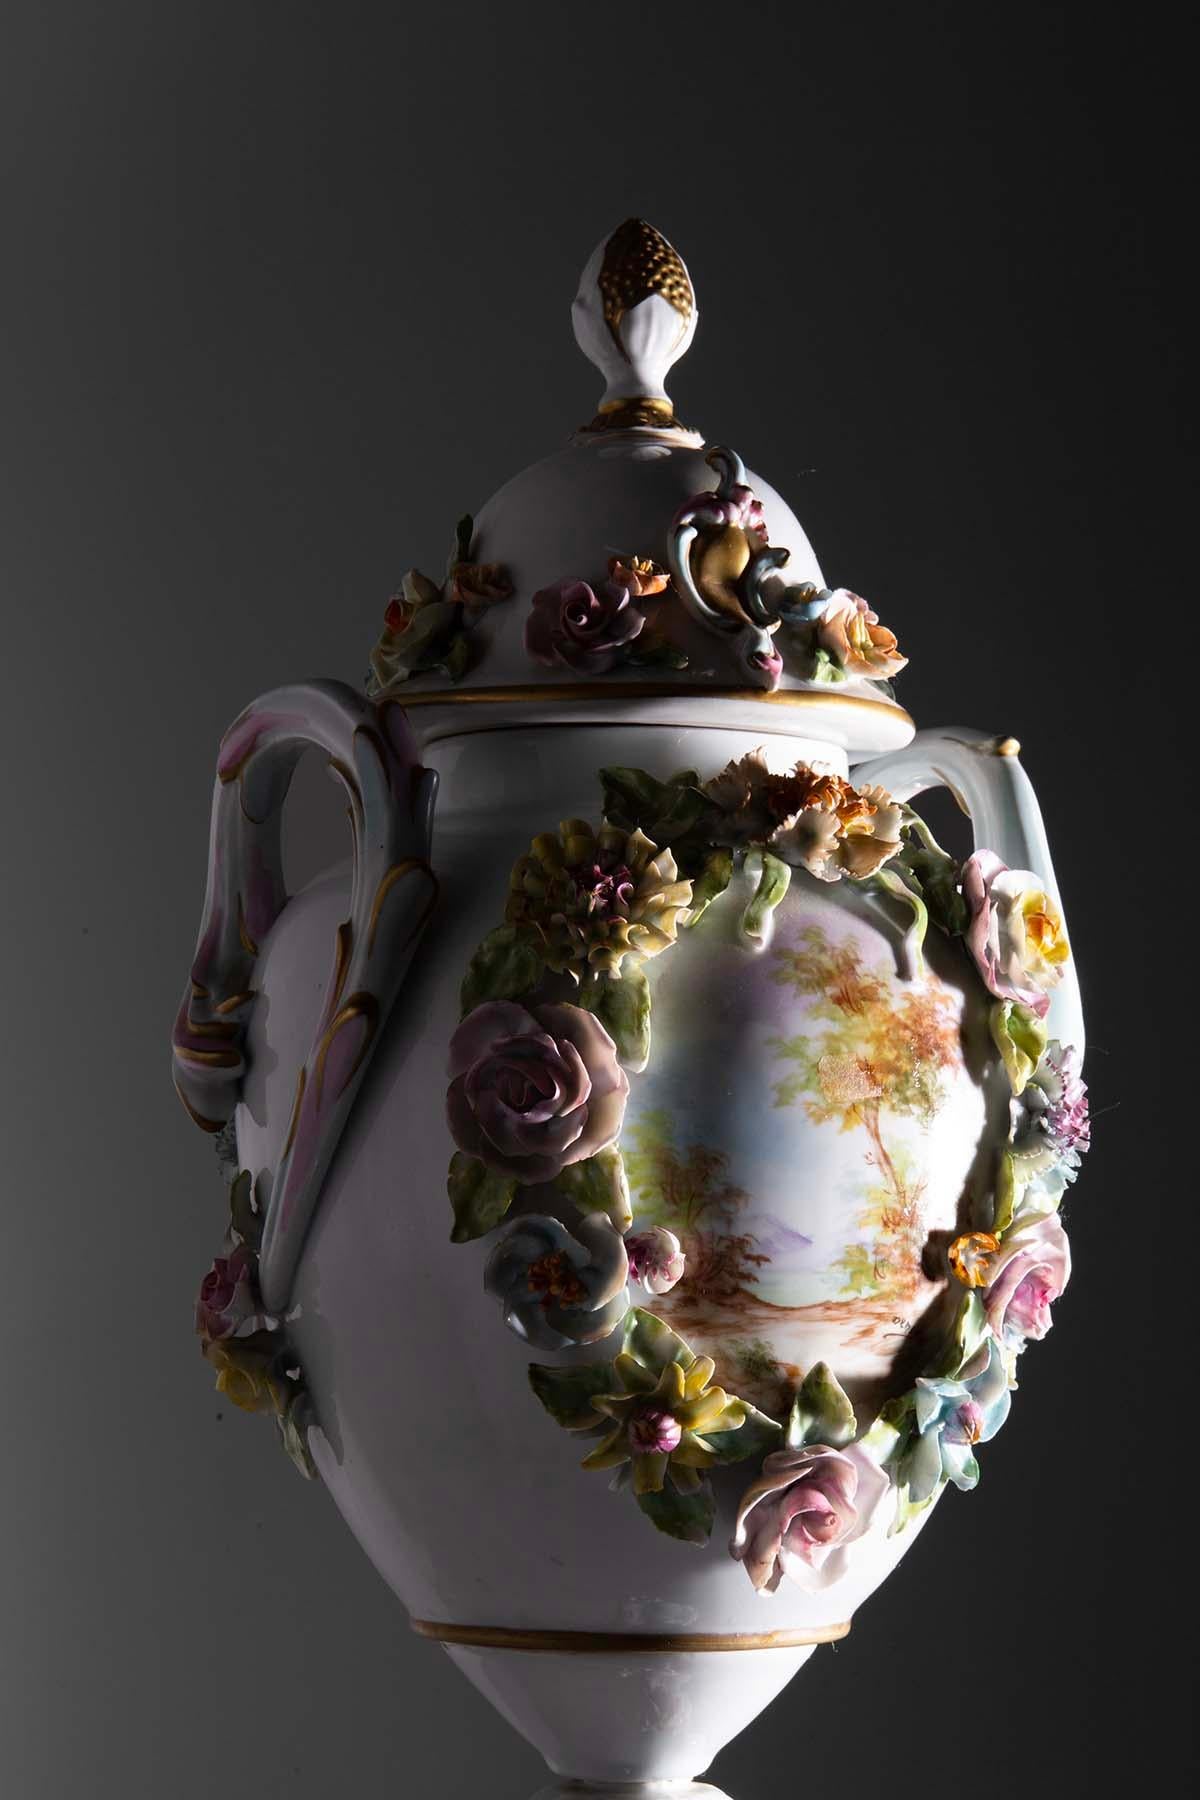 Explore the magnificent world of Italian art and elegance with this extraordinary Capodimonte decorative vase from the 20th century. Capodimonte porcelain, renowned for its extraordinary beauty and quality, finds an exceptional expression in this